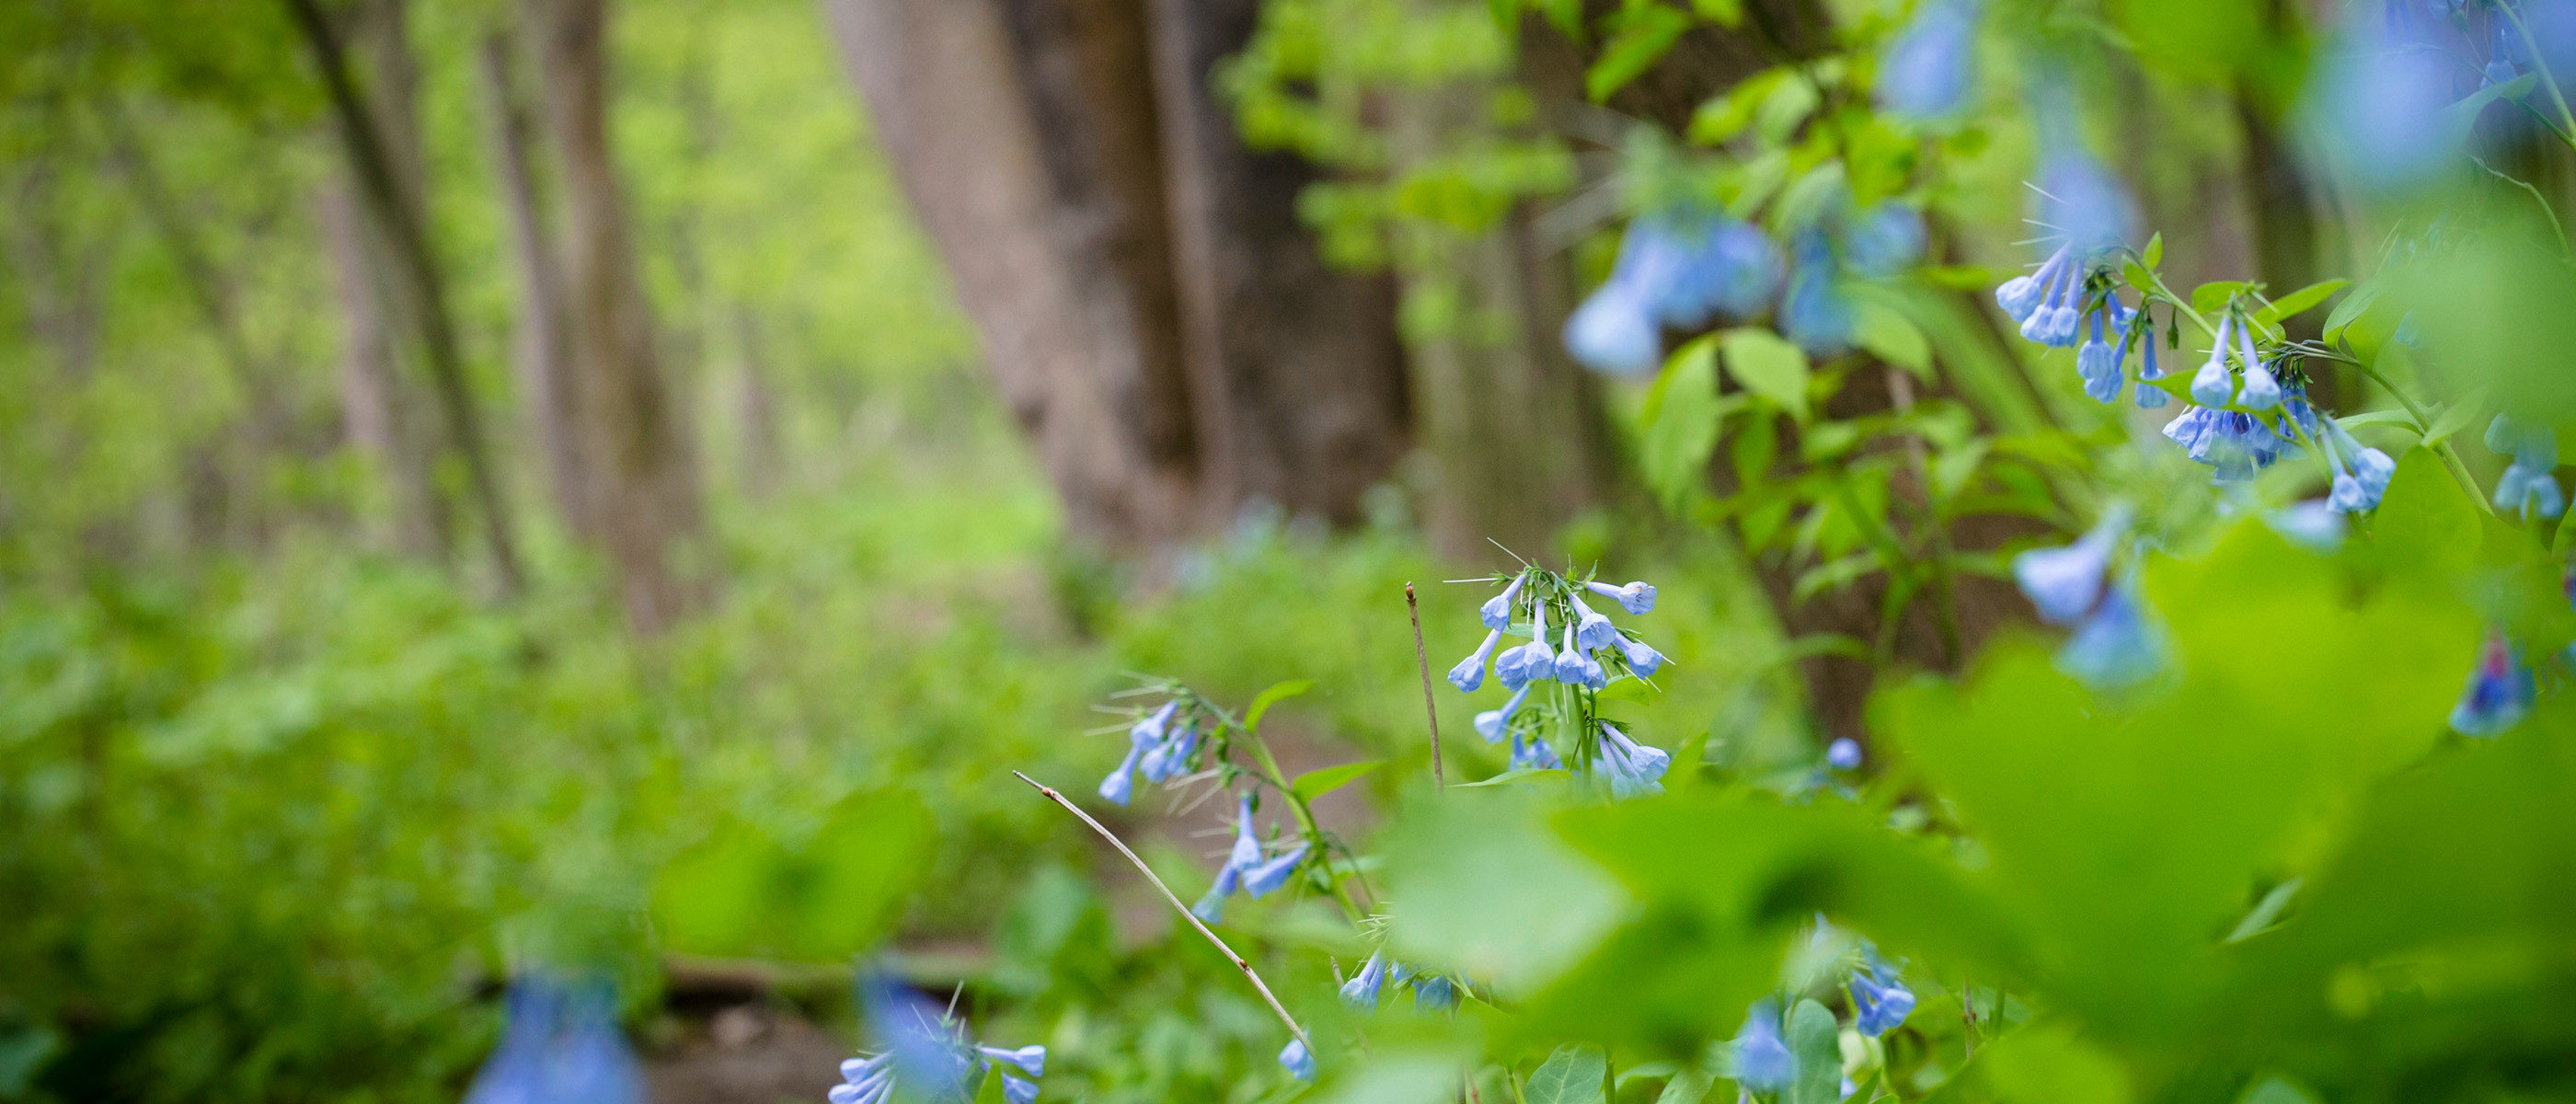 Bluebells blooming in the warmth of spring, creating a serene and picturesque landscape.